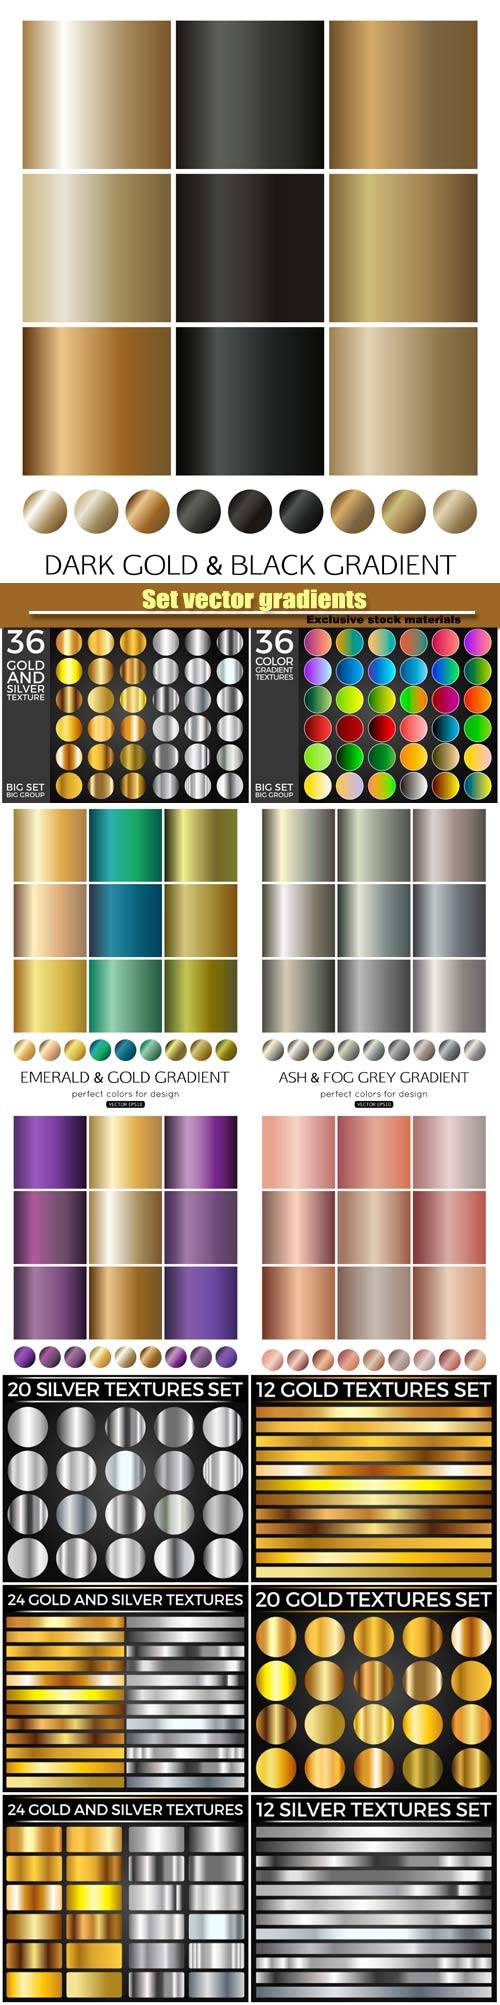 Set vector gradients, gold gradients for fashion background